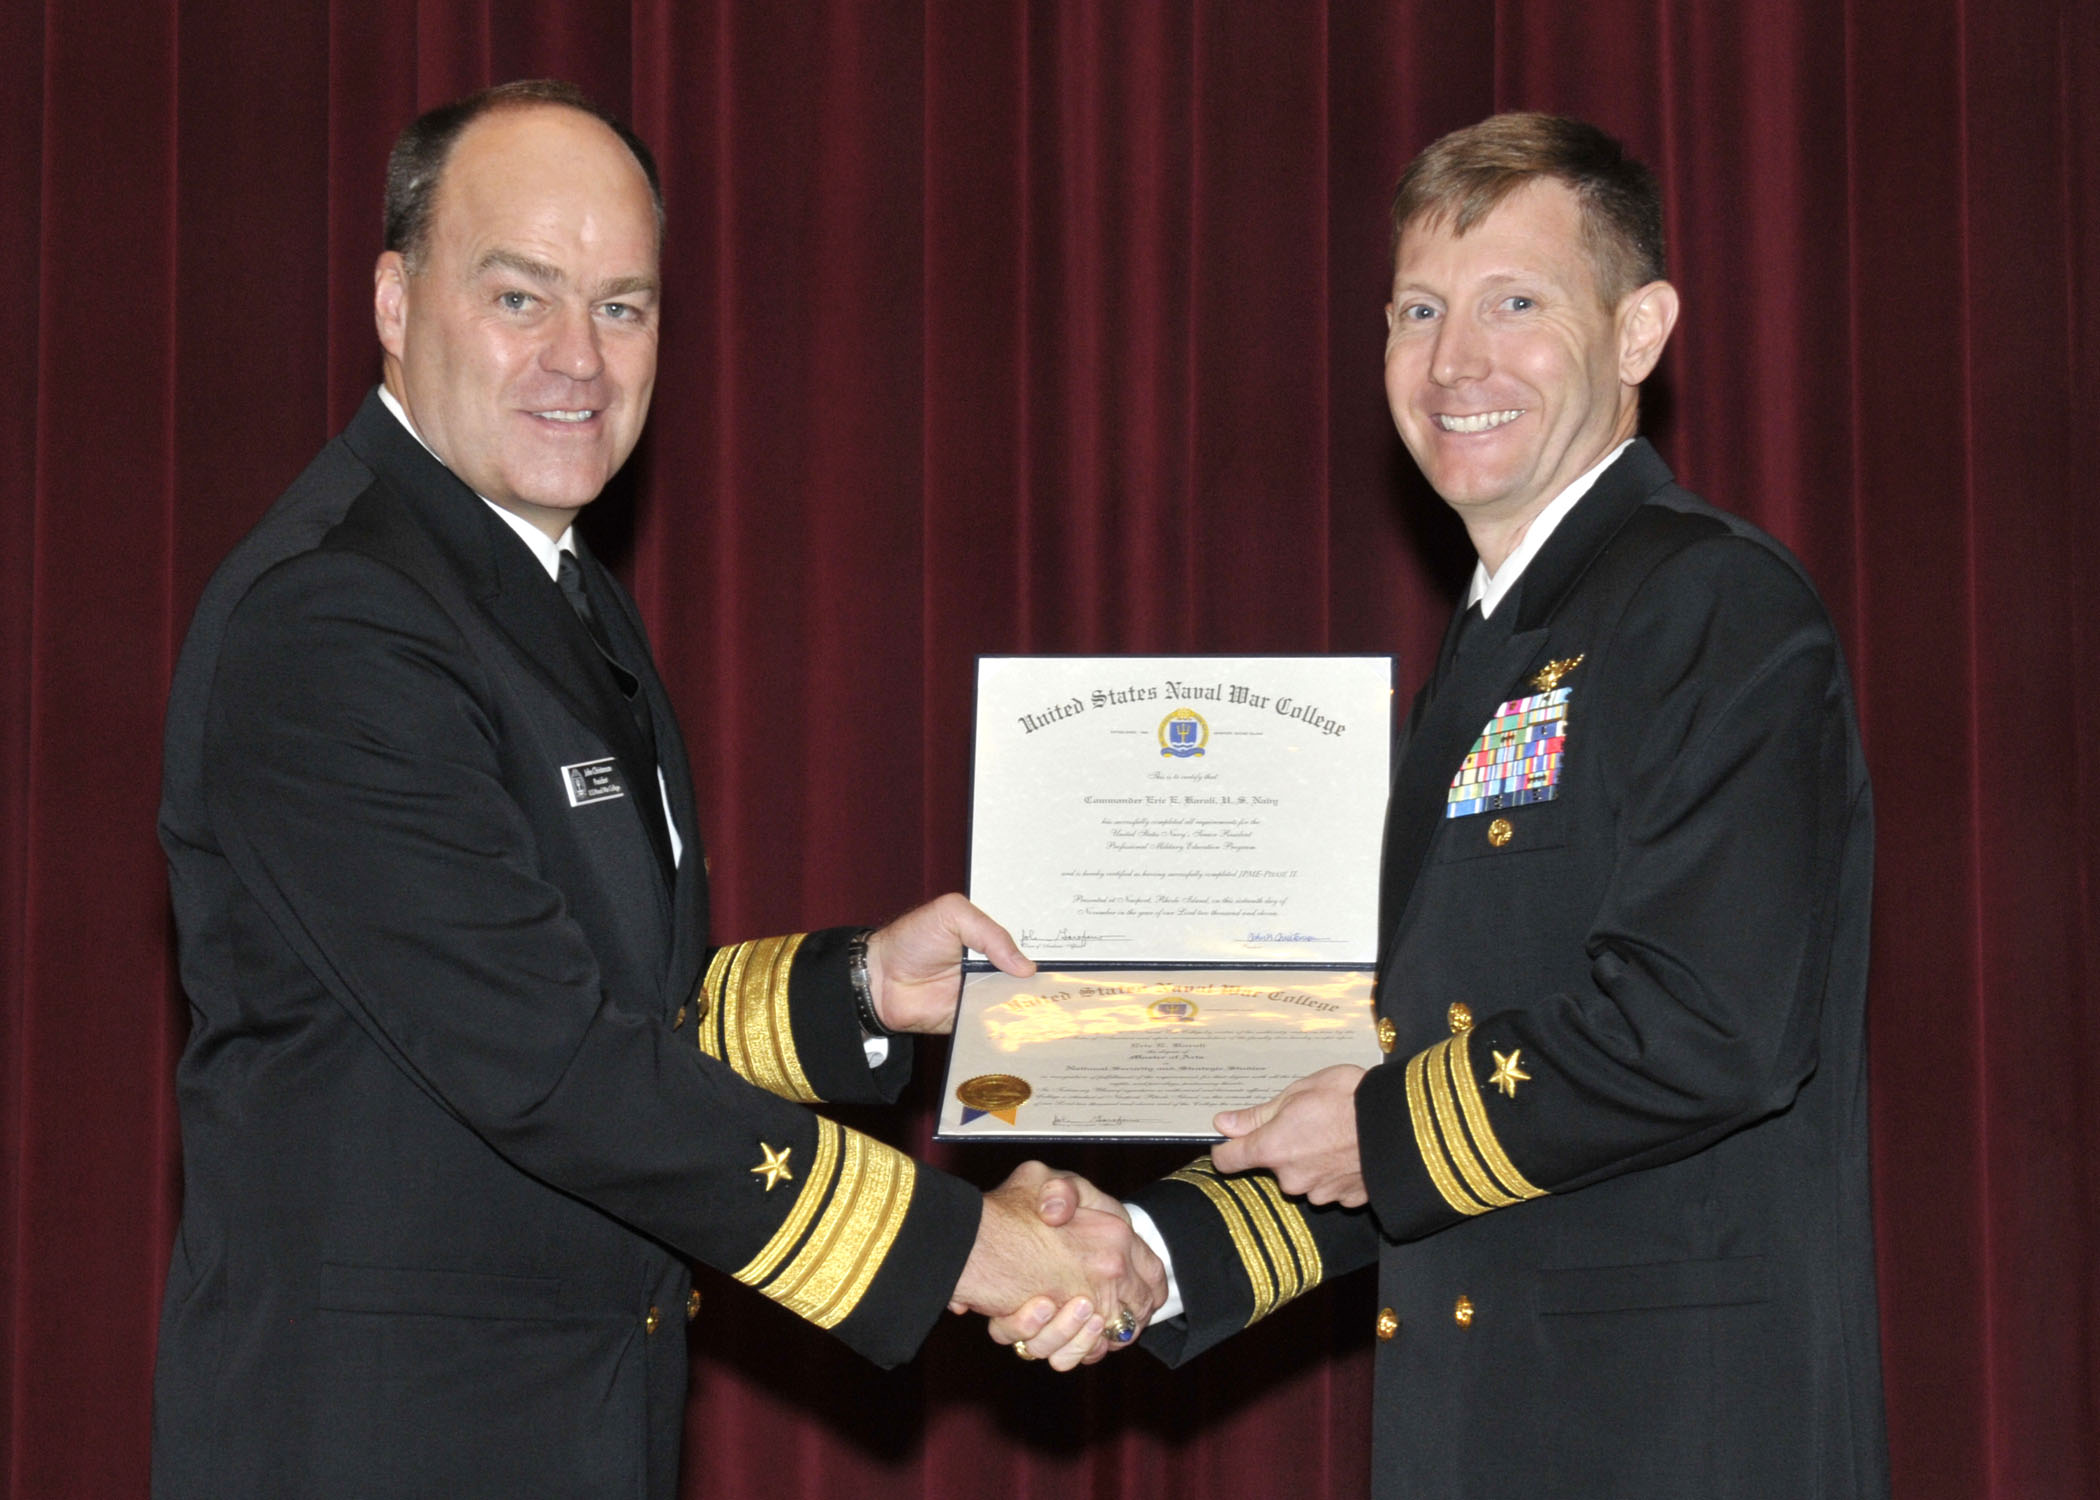 two sailors shaking hands while holding an award